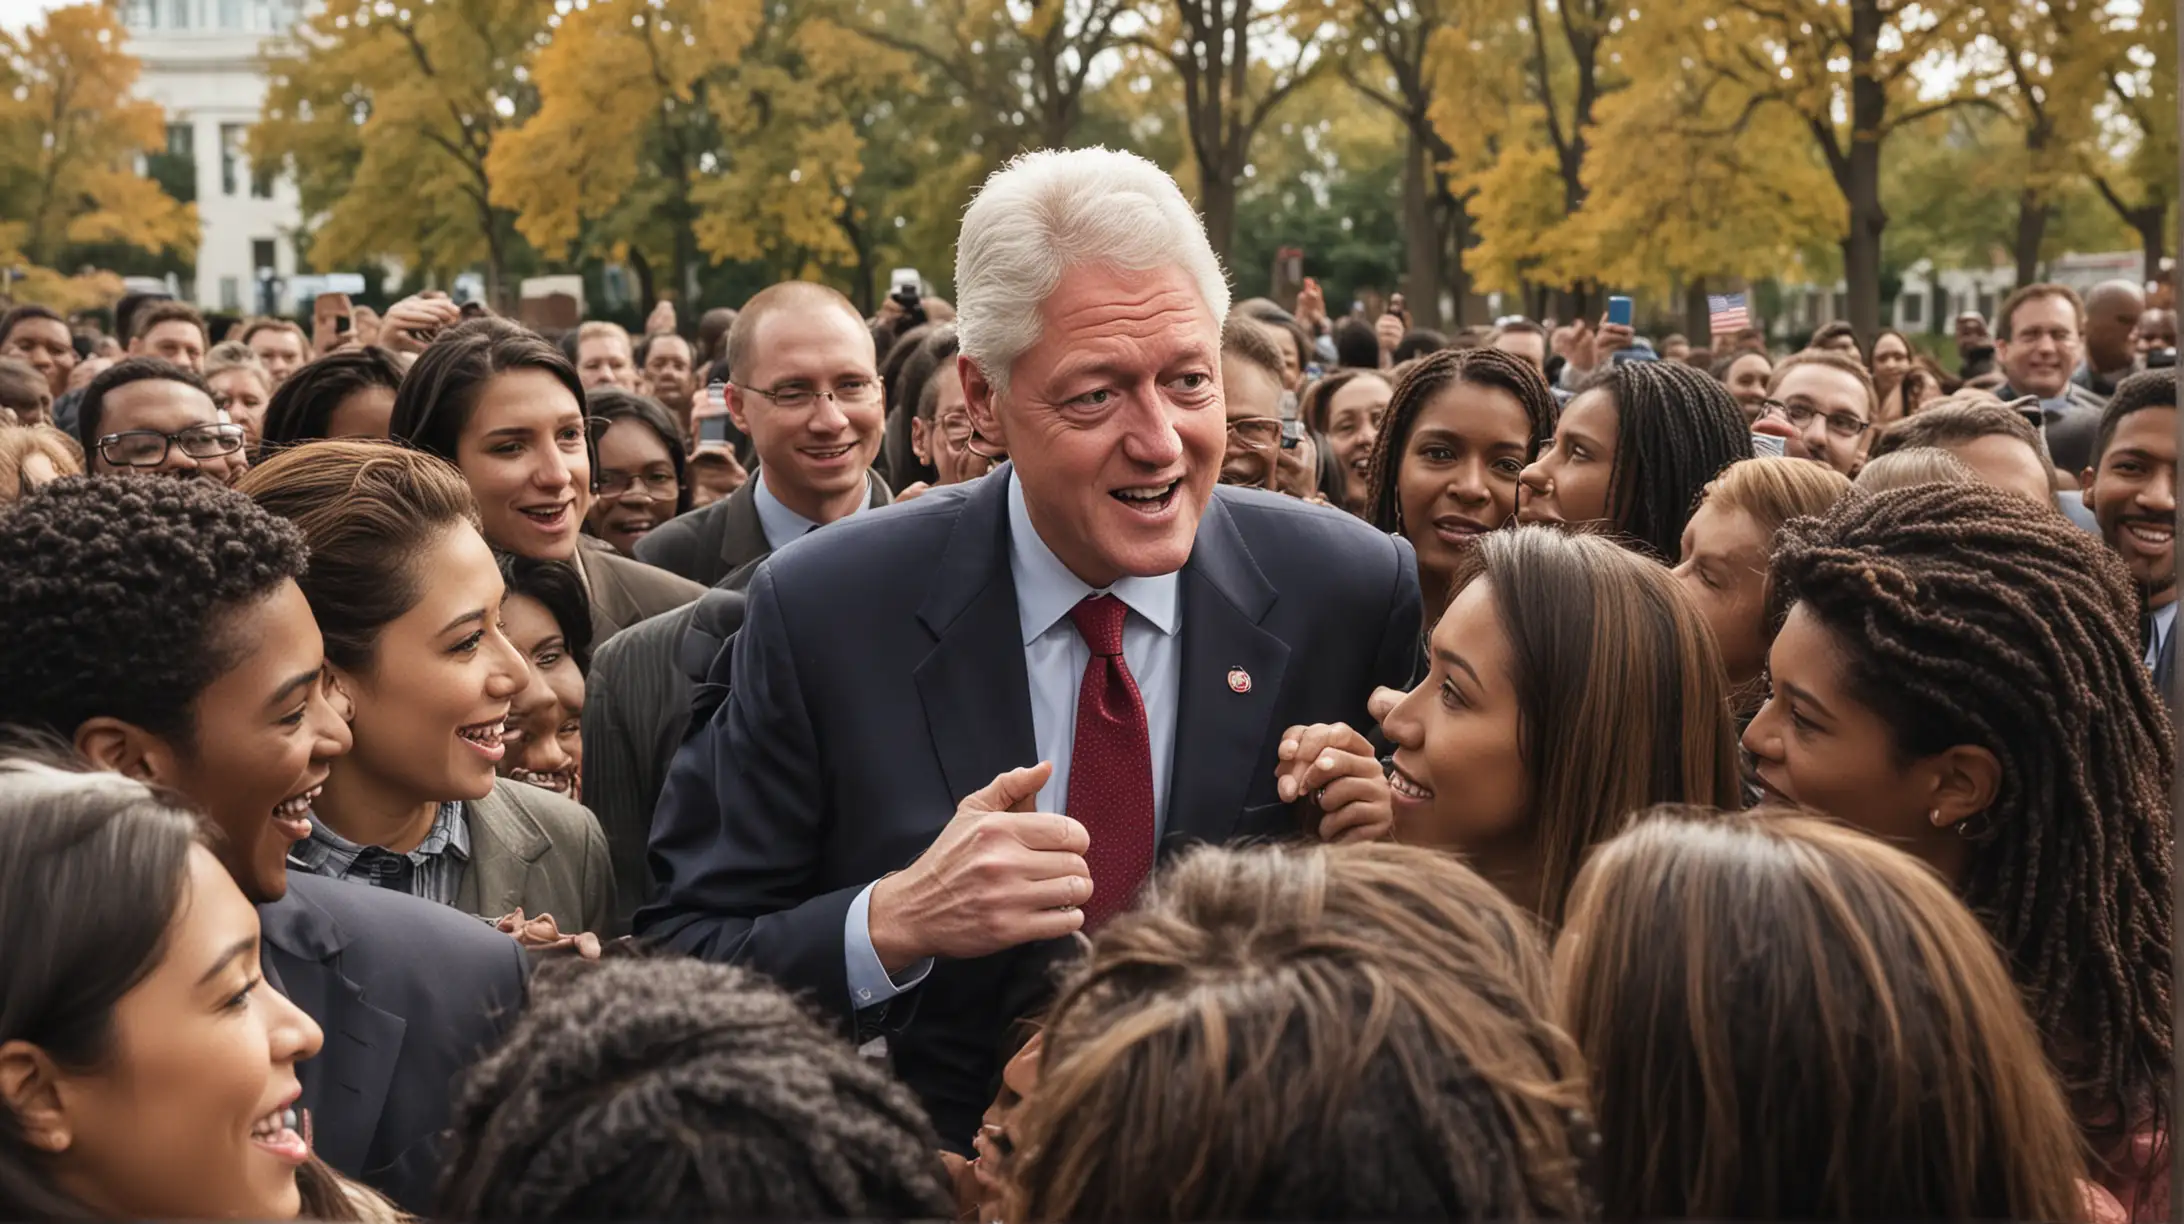 Bill Clinton Engages in Friendly Conversation with Diverse Crowd